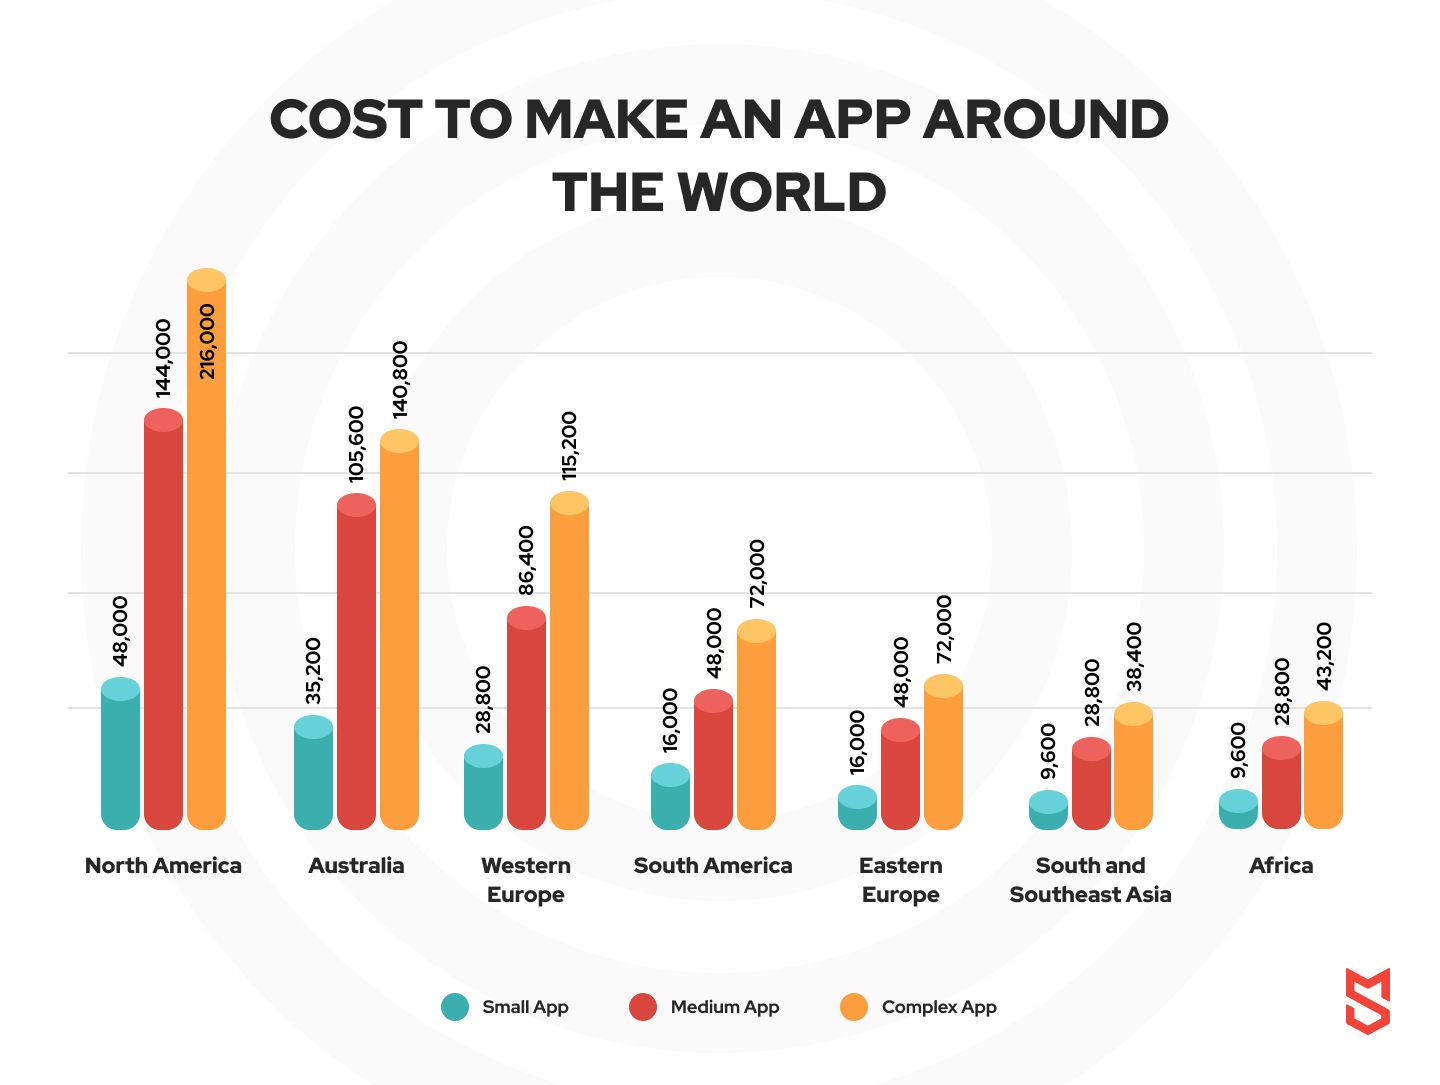 Cost to make an app around the world